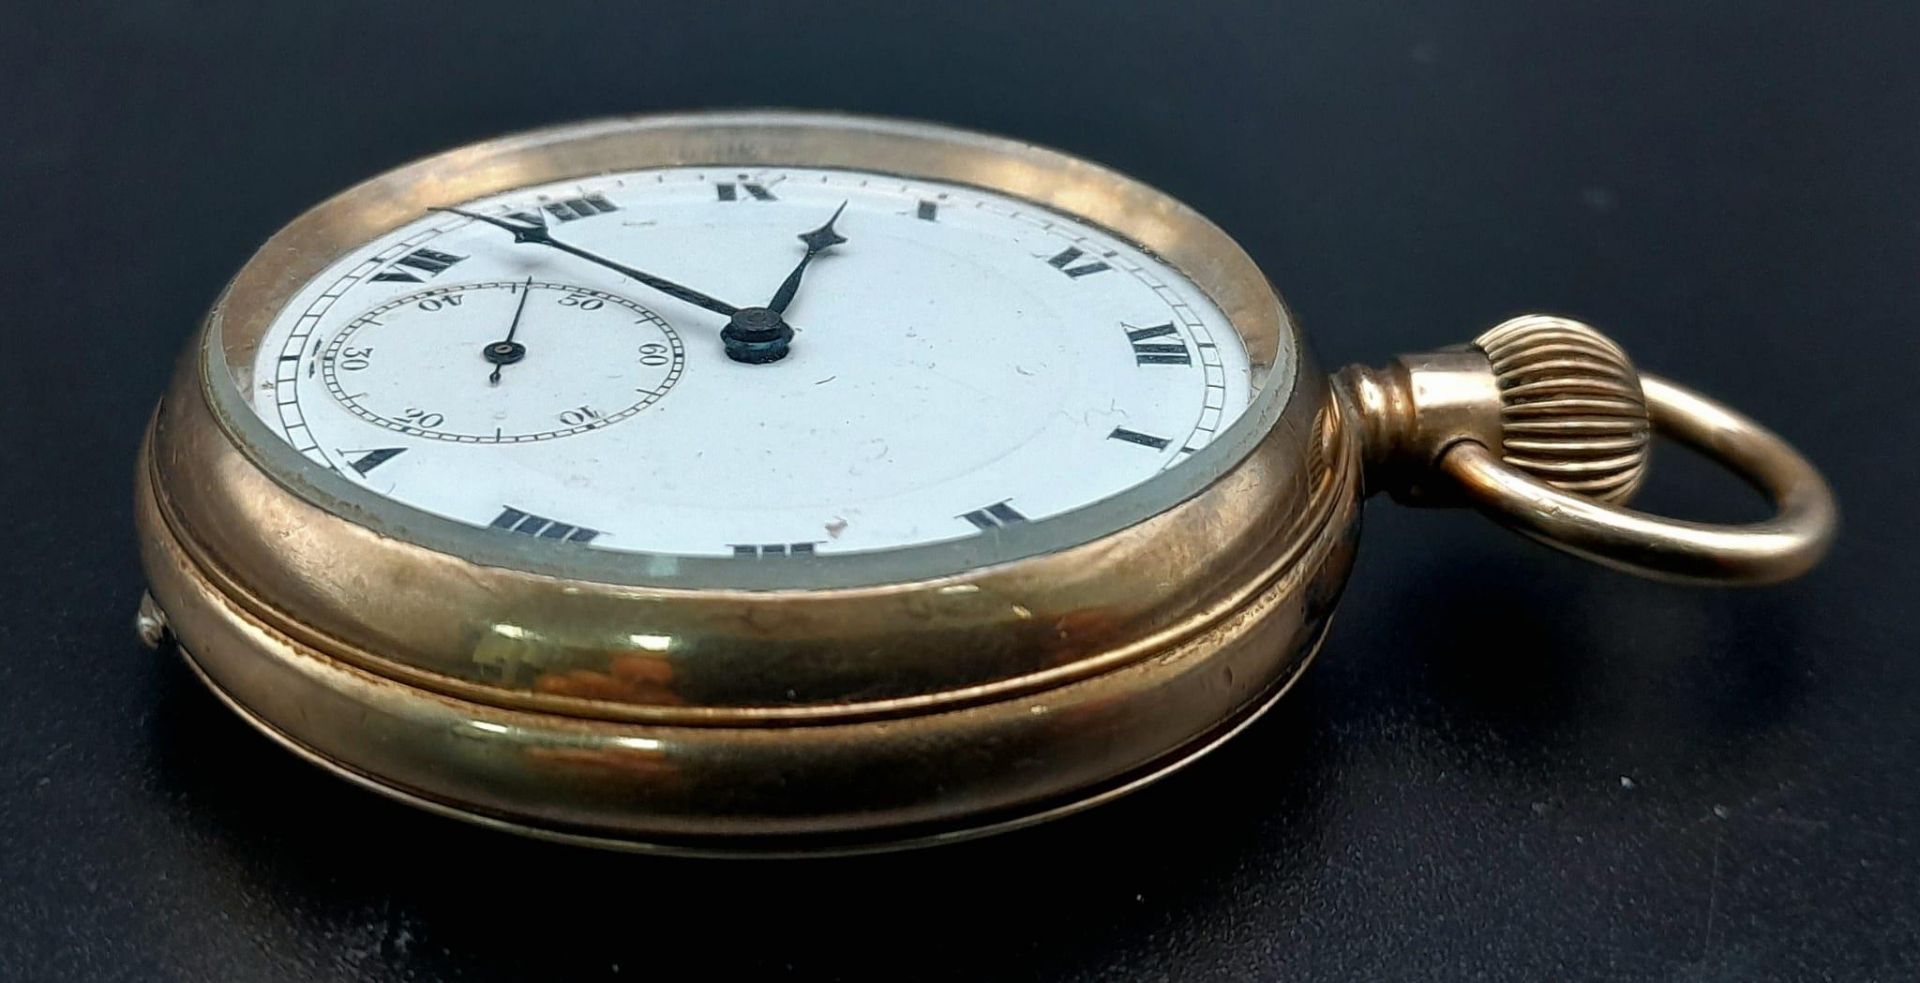 An Antique Illinois Gold Plated Pocket Watch with a Buren Movement. 5cm diameter. White dial with - Image 2 of 8